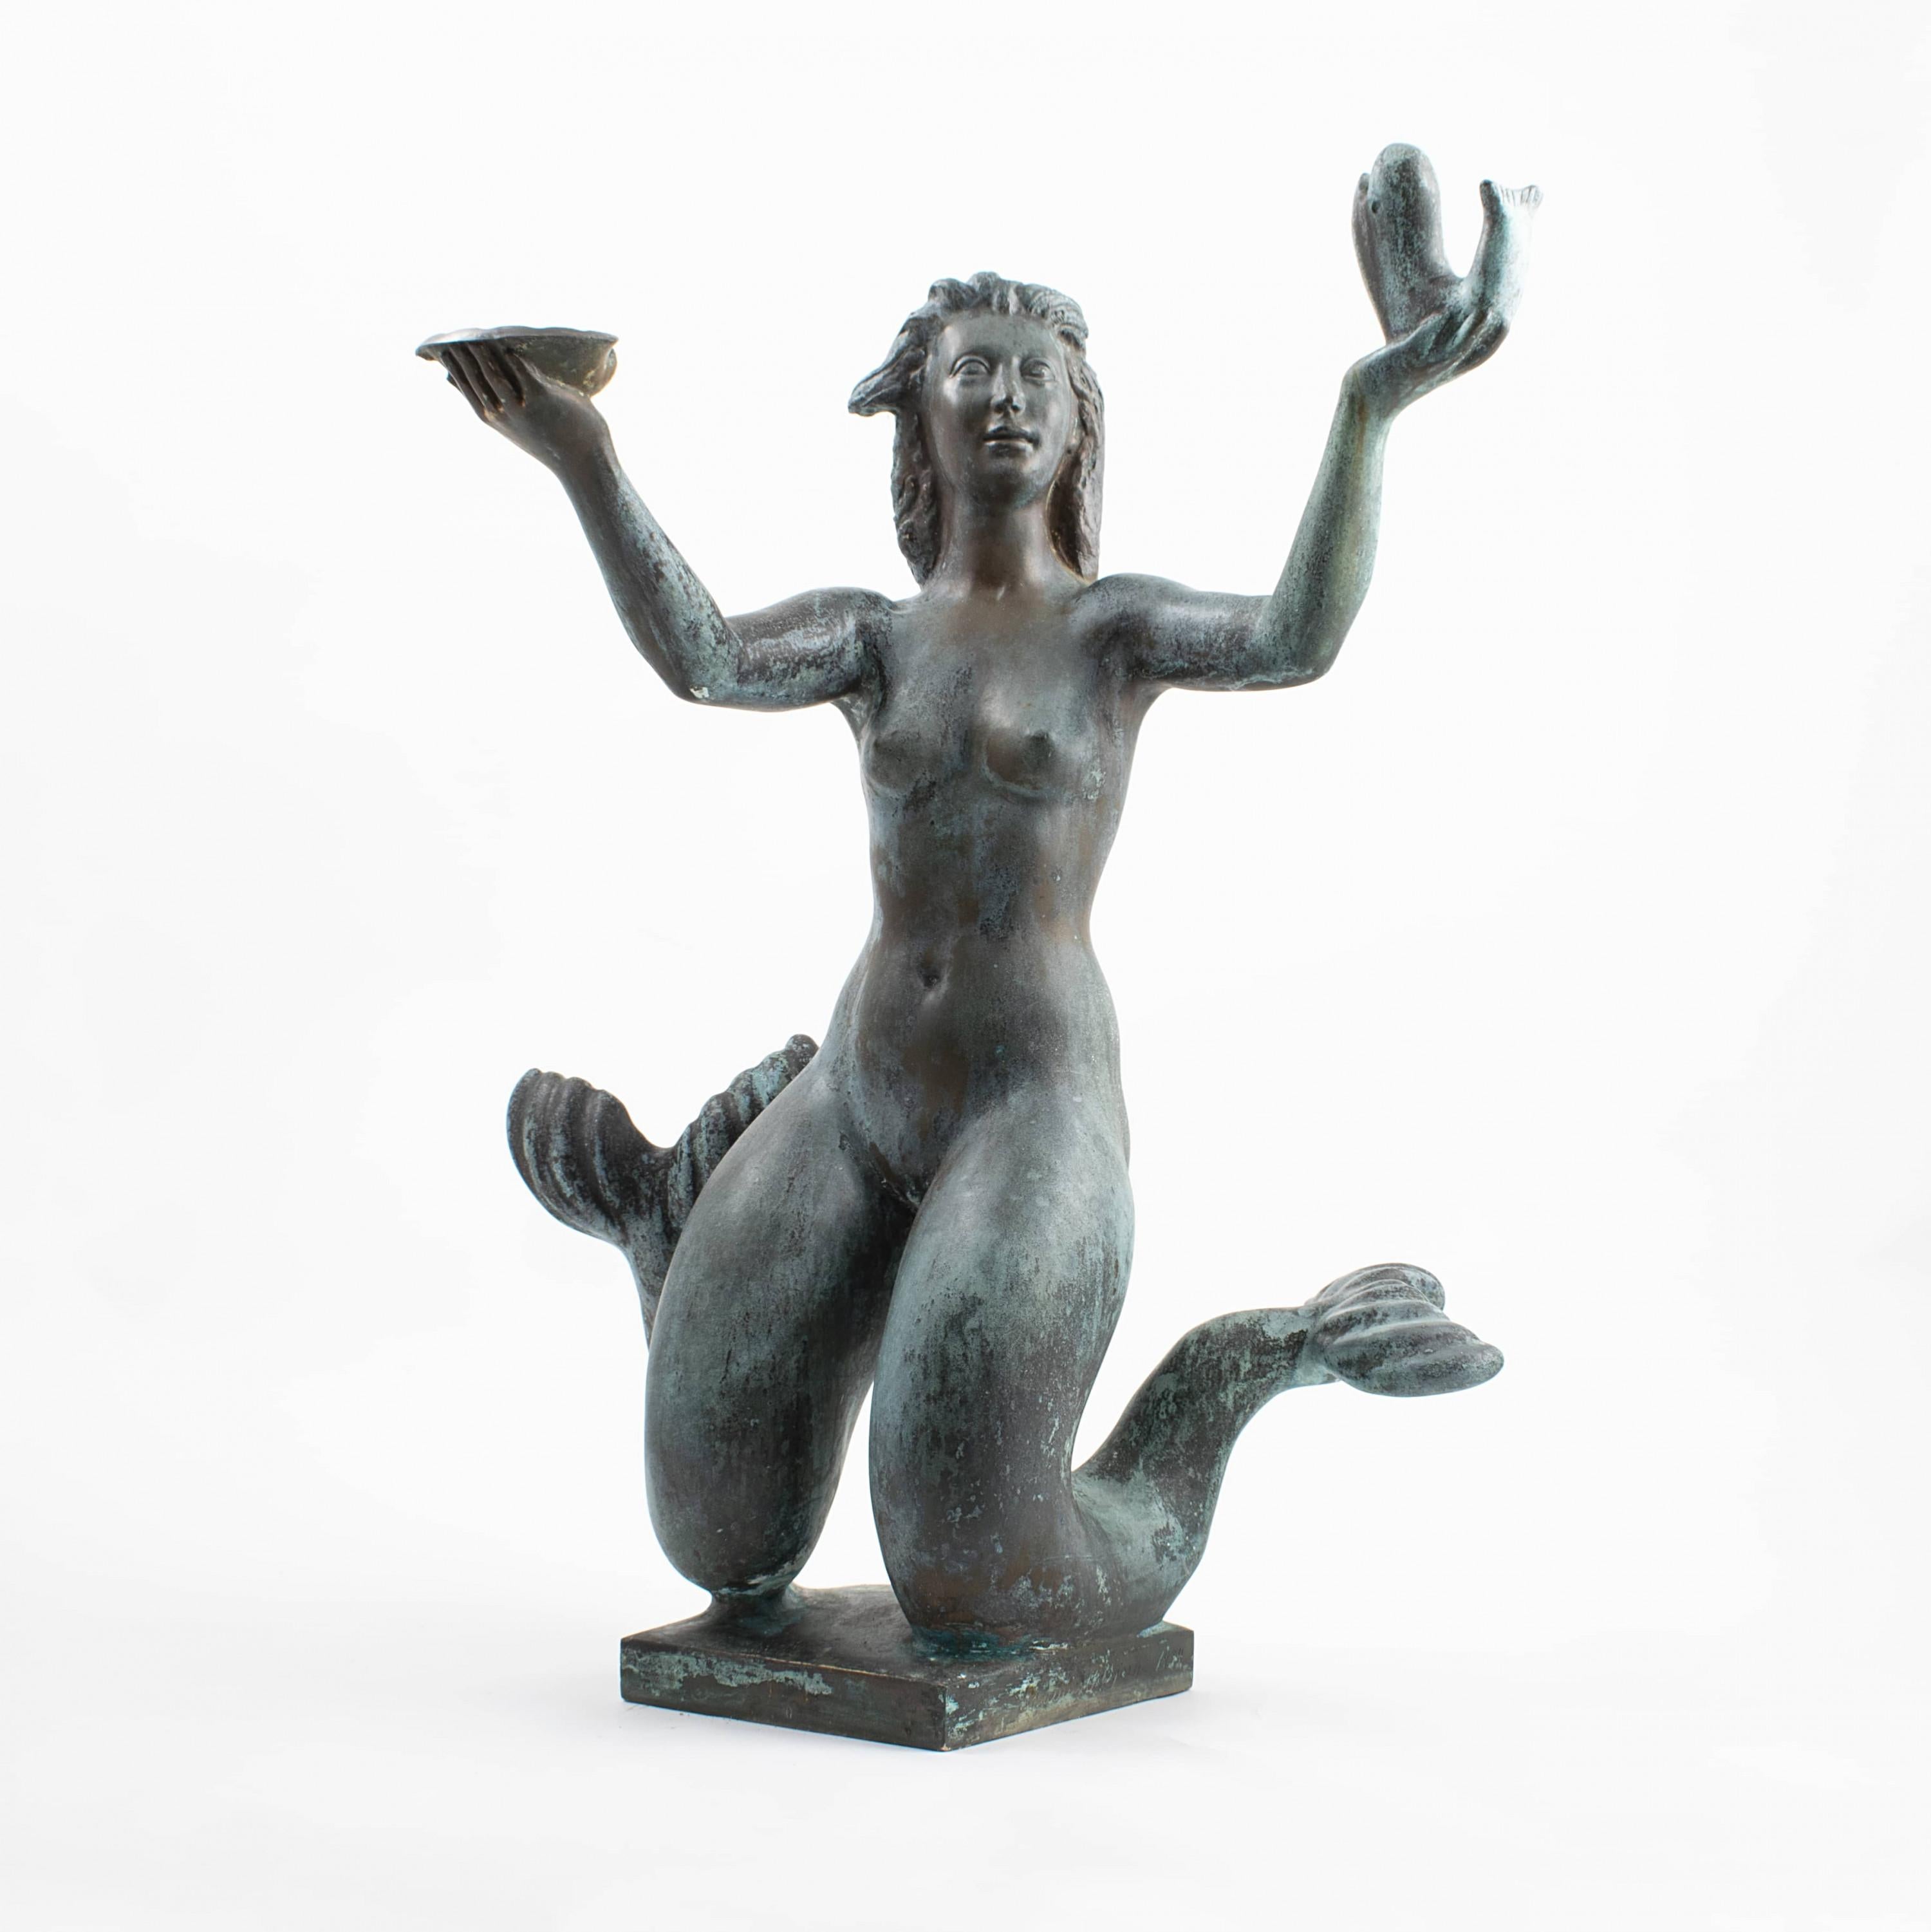 Johannes C. Bjerg, 1886-1955.
Bronze sculpture in the form of mermaid fountain with fish and mussel. The water springs from the fish's mouth to the mussel. Mounted on original granite base, with natural organic shape. Beautiful natural,